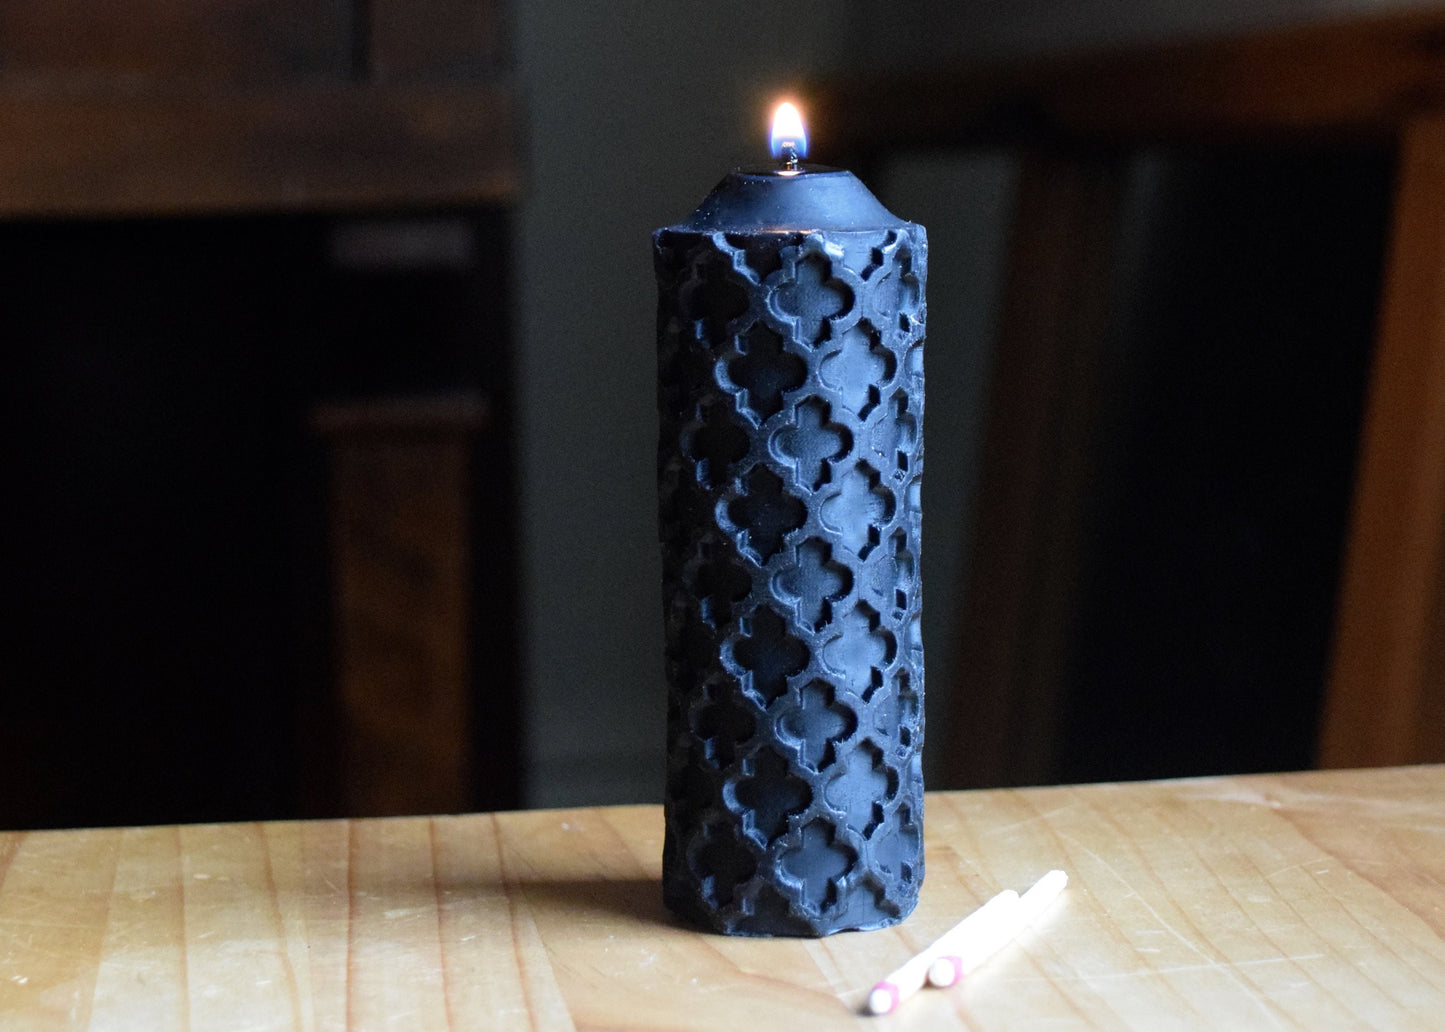 Black Beeswax Candle - Charcoal Beeswax - One Beeswax Candle // Candle, Beeswax, Pillar Candle, Eco Friendly, Non Toxic